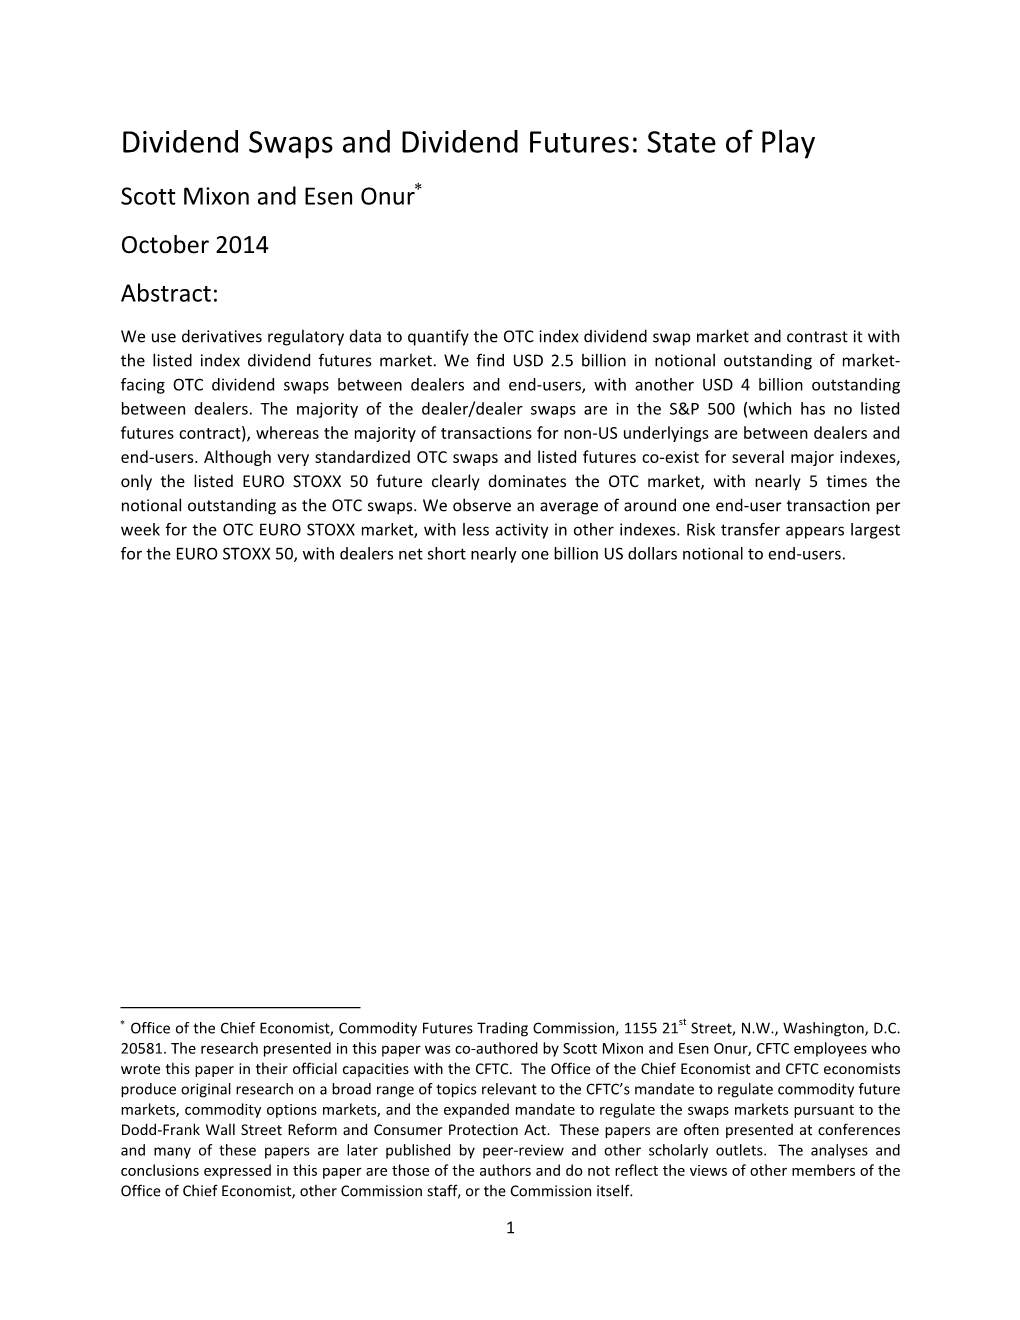 Dividend Swaps and Dividend Futures: State of Play Scott Mixon and Esen Onur October 2014 Abstract